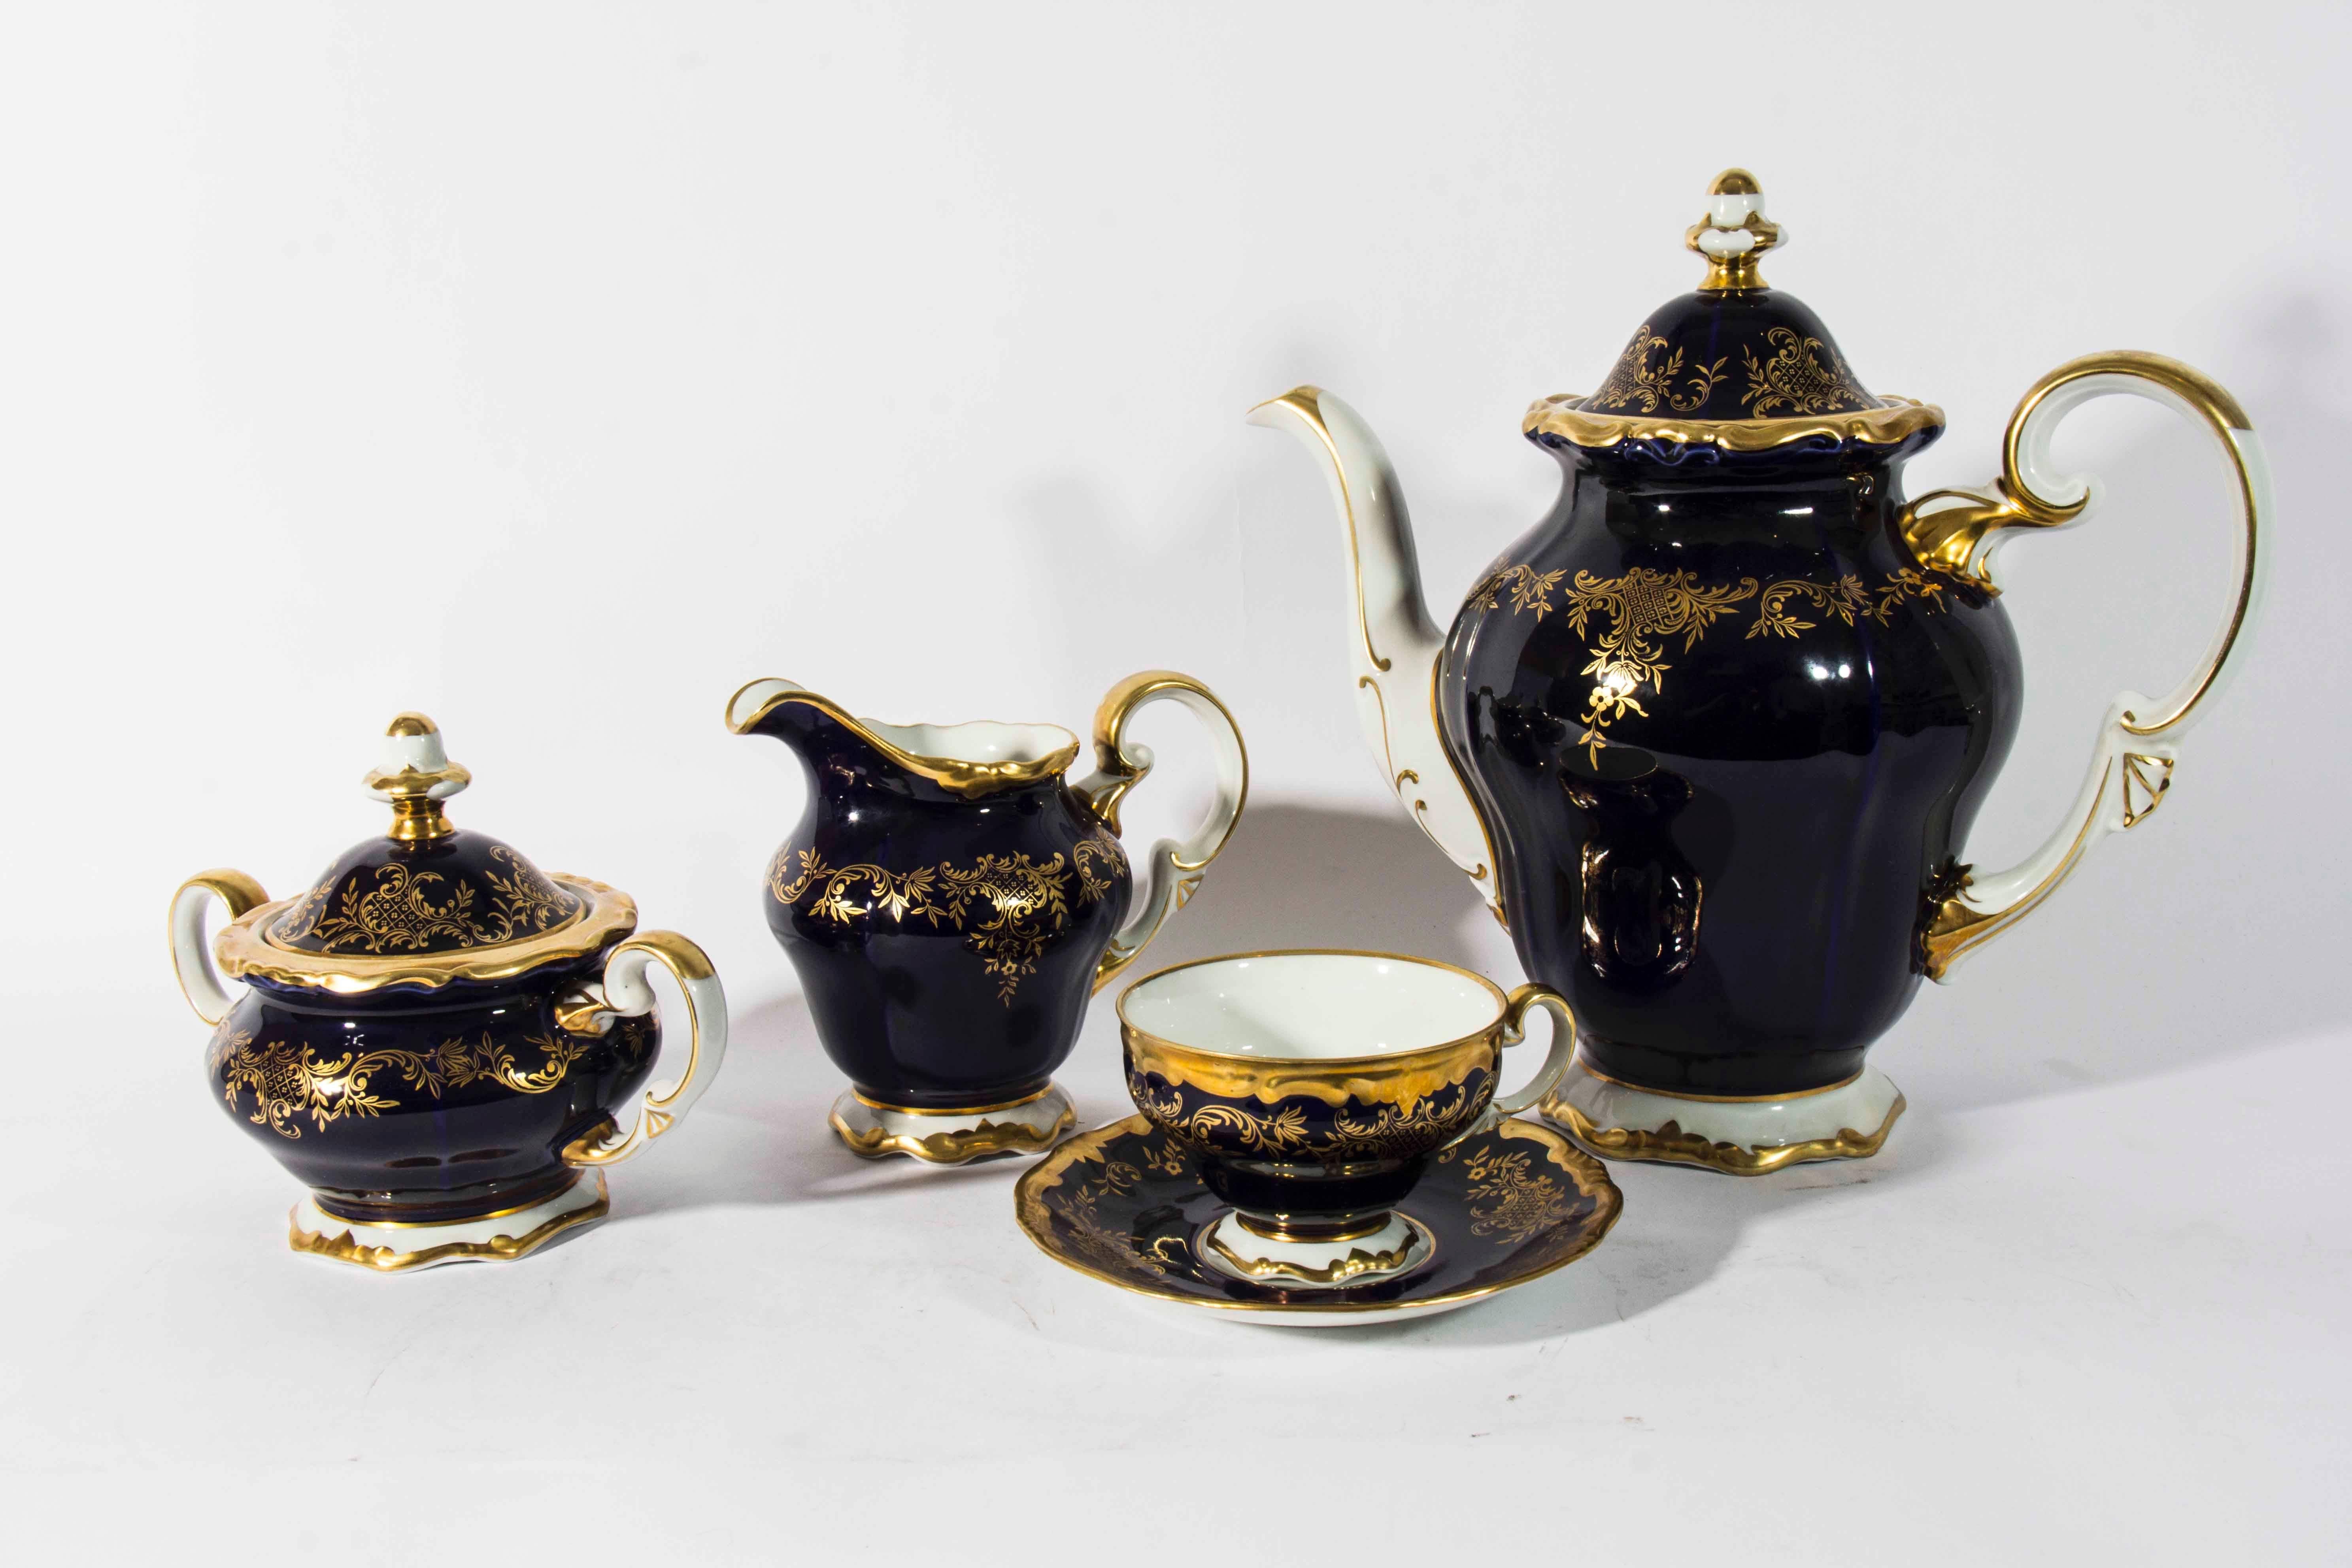 Vintage 1940s cobalt with gold trim design complete service for eight with extra pieces available. From Weimar Germany. Total count of 86 pieces.

Eight cups and saucers.
Eight dinner plates.
Eight salad plates.
Eight bread and butter